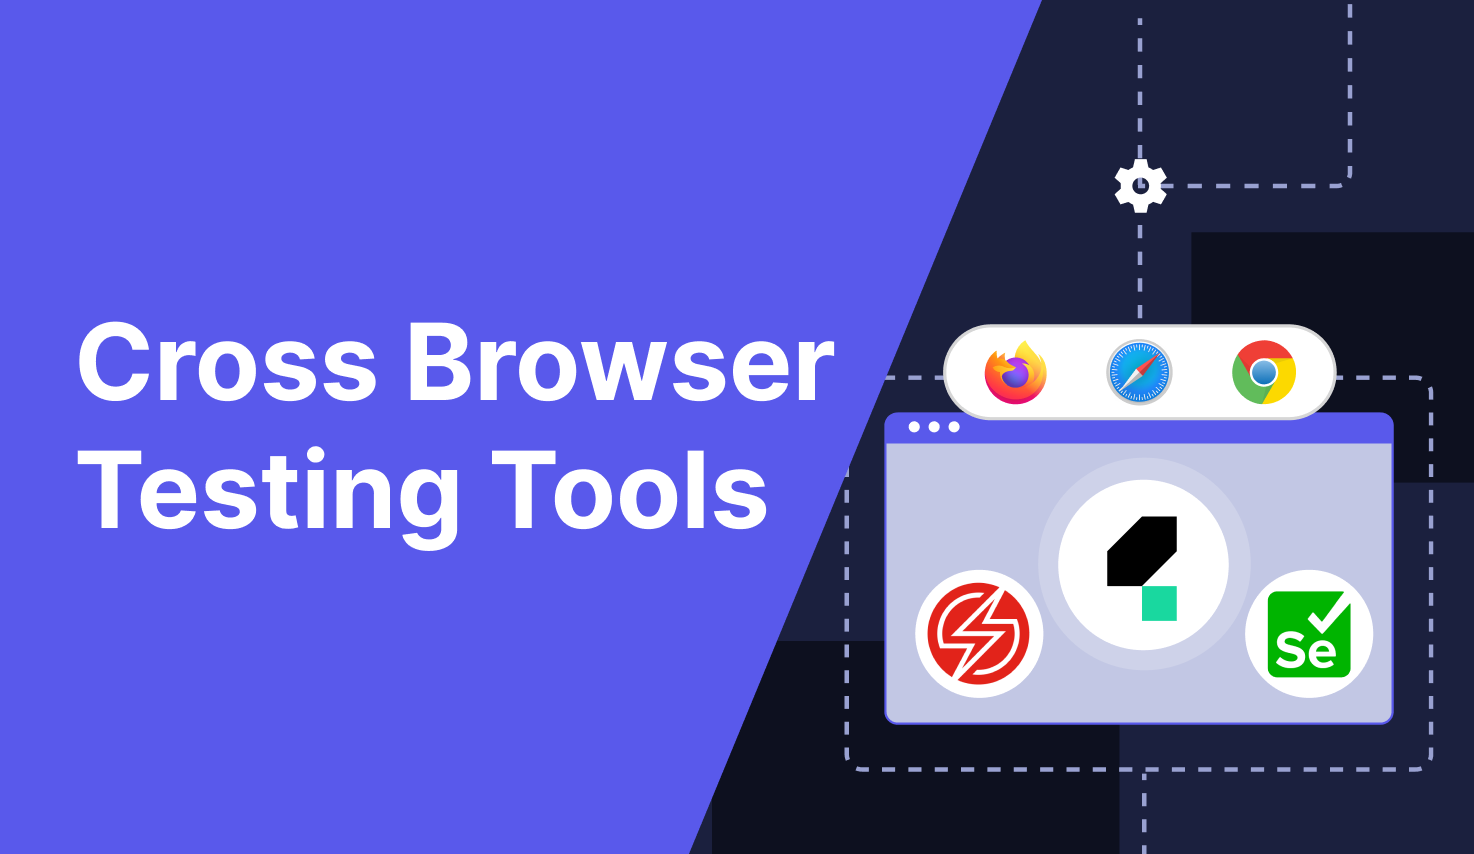 Top 3 Cross Browser Testing Tools You Should Know